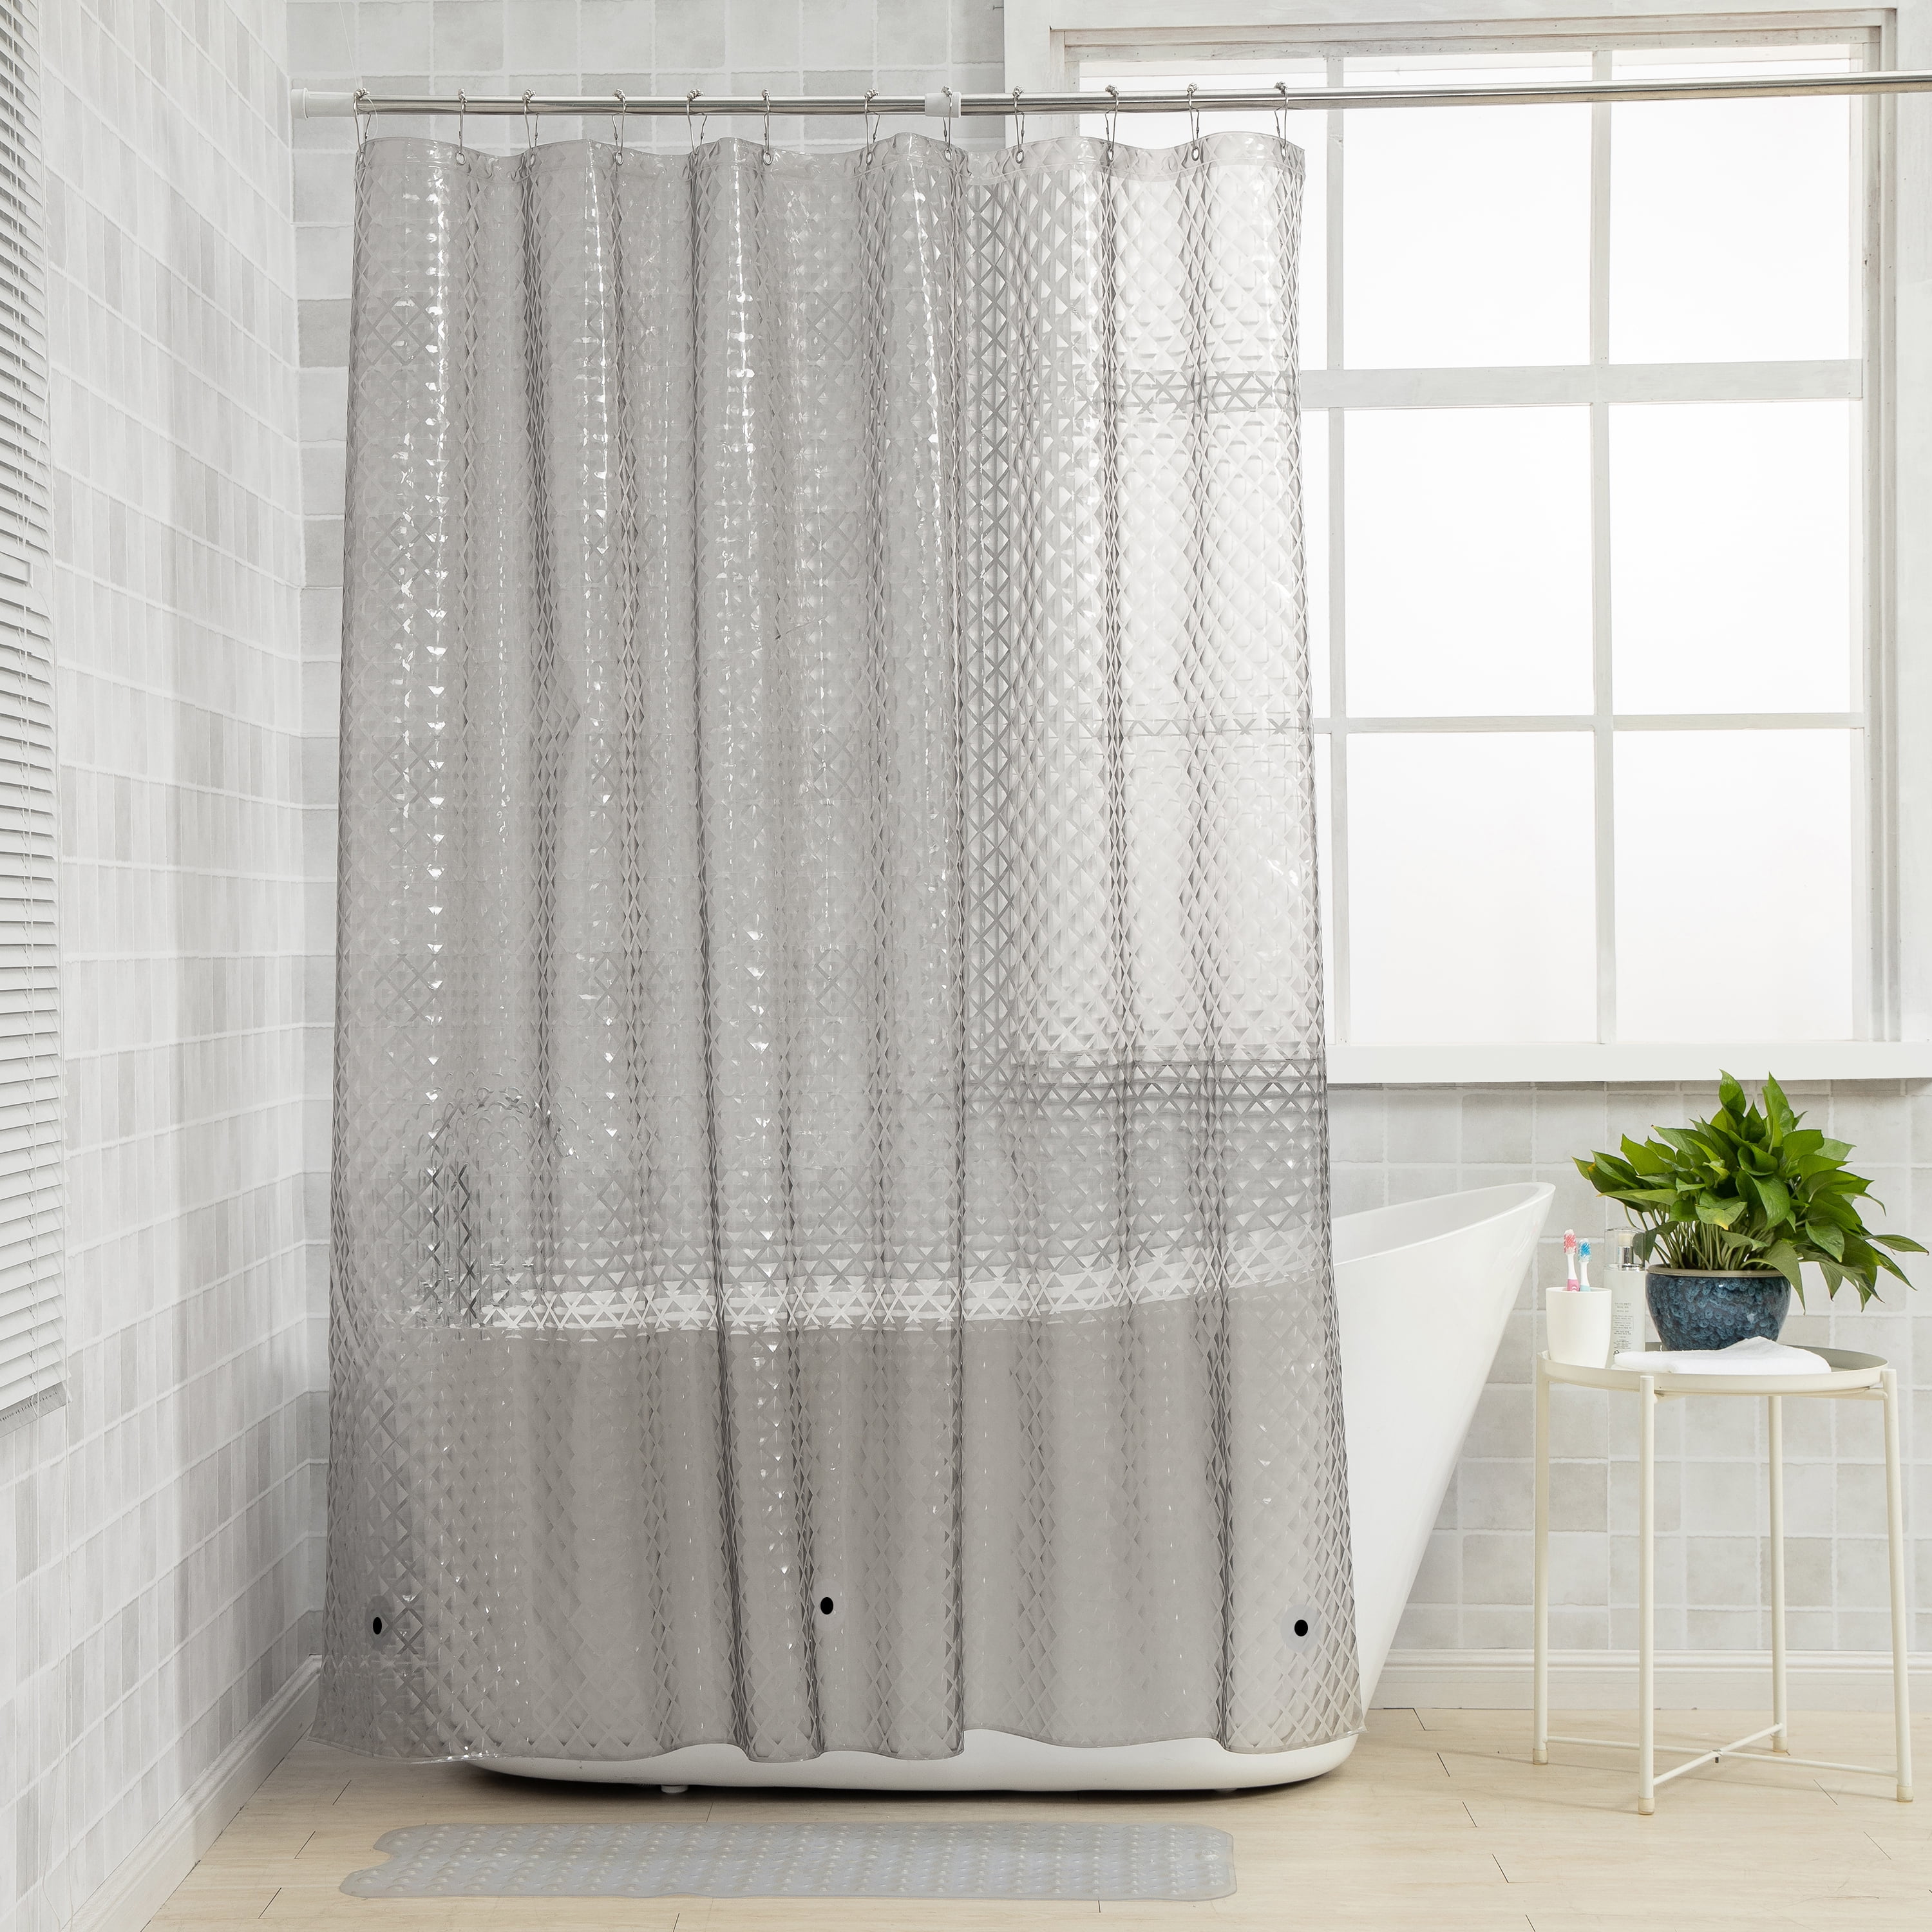 Clear 3D Water Cube PEVA Shower Home Bathroom Waterproof Fabric New Curtain LD 